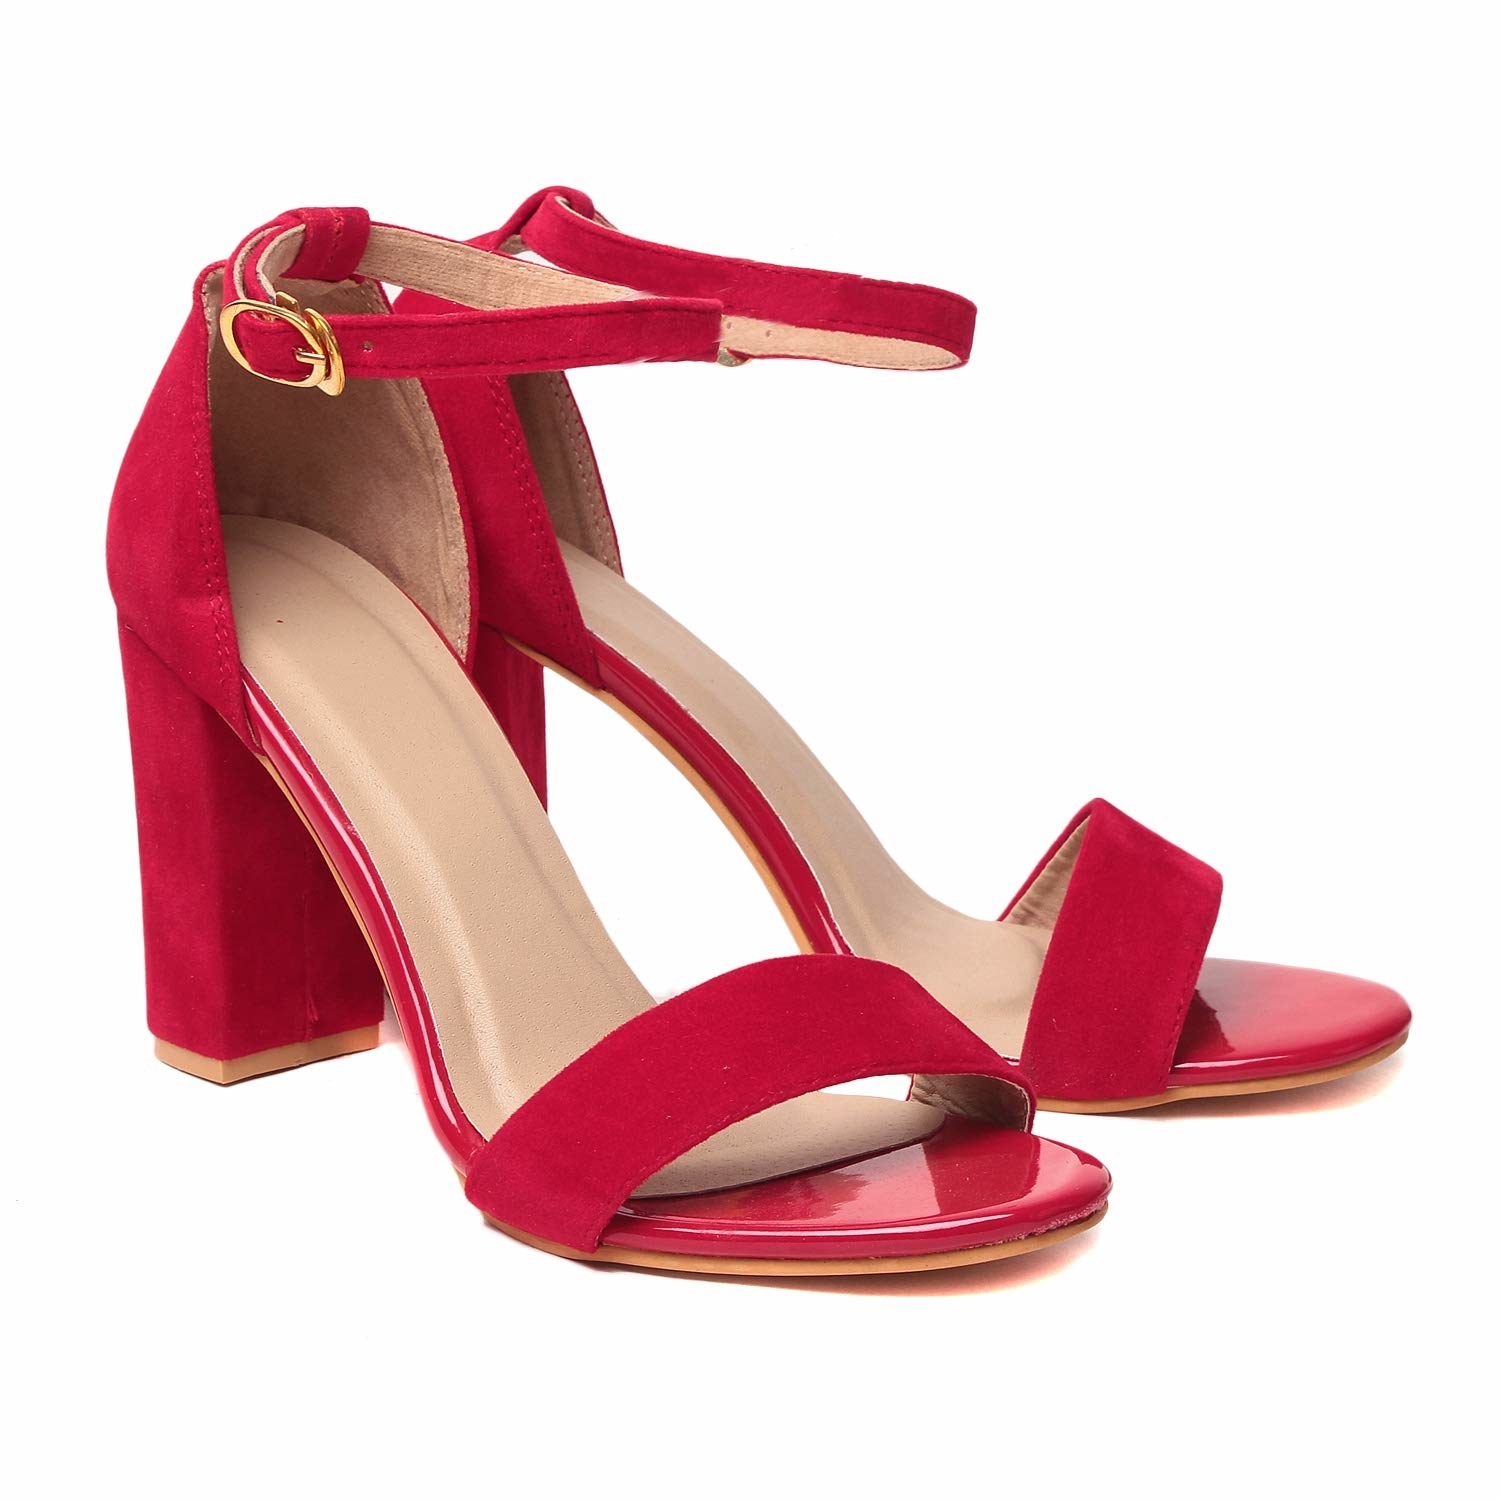 Red heels with a gold buckle on the ankle strap